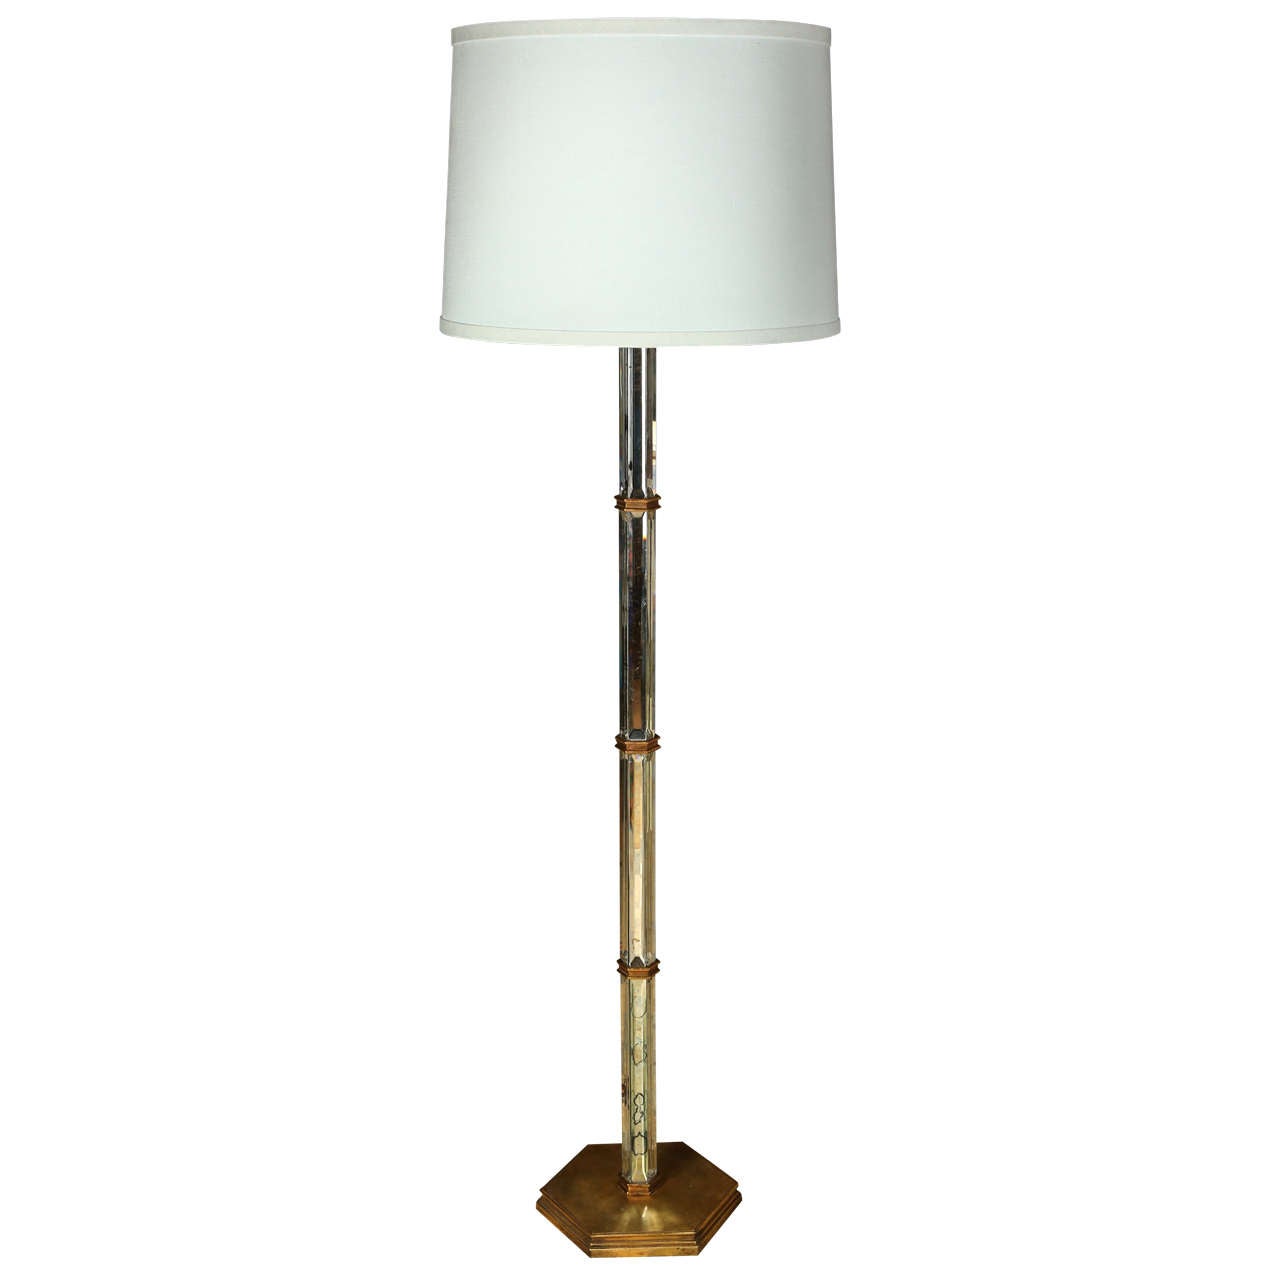 Paul Marra Brass and Beveled Mirror Floor Lamp For Sale